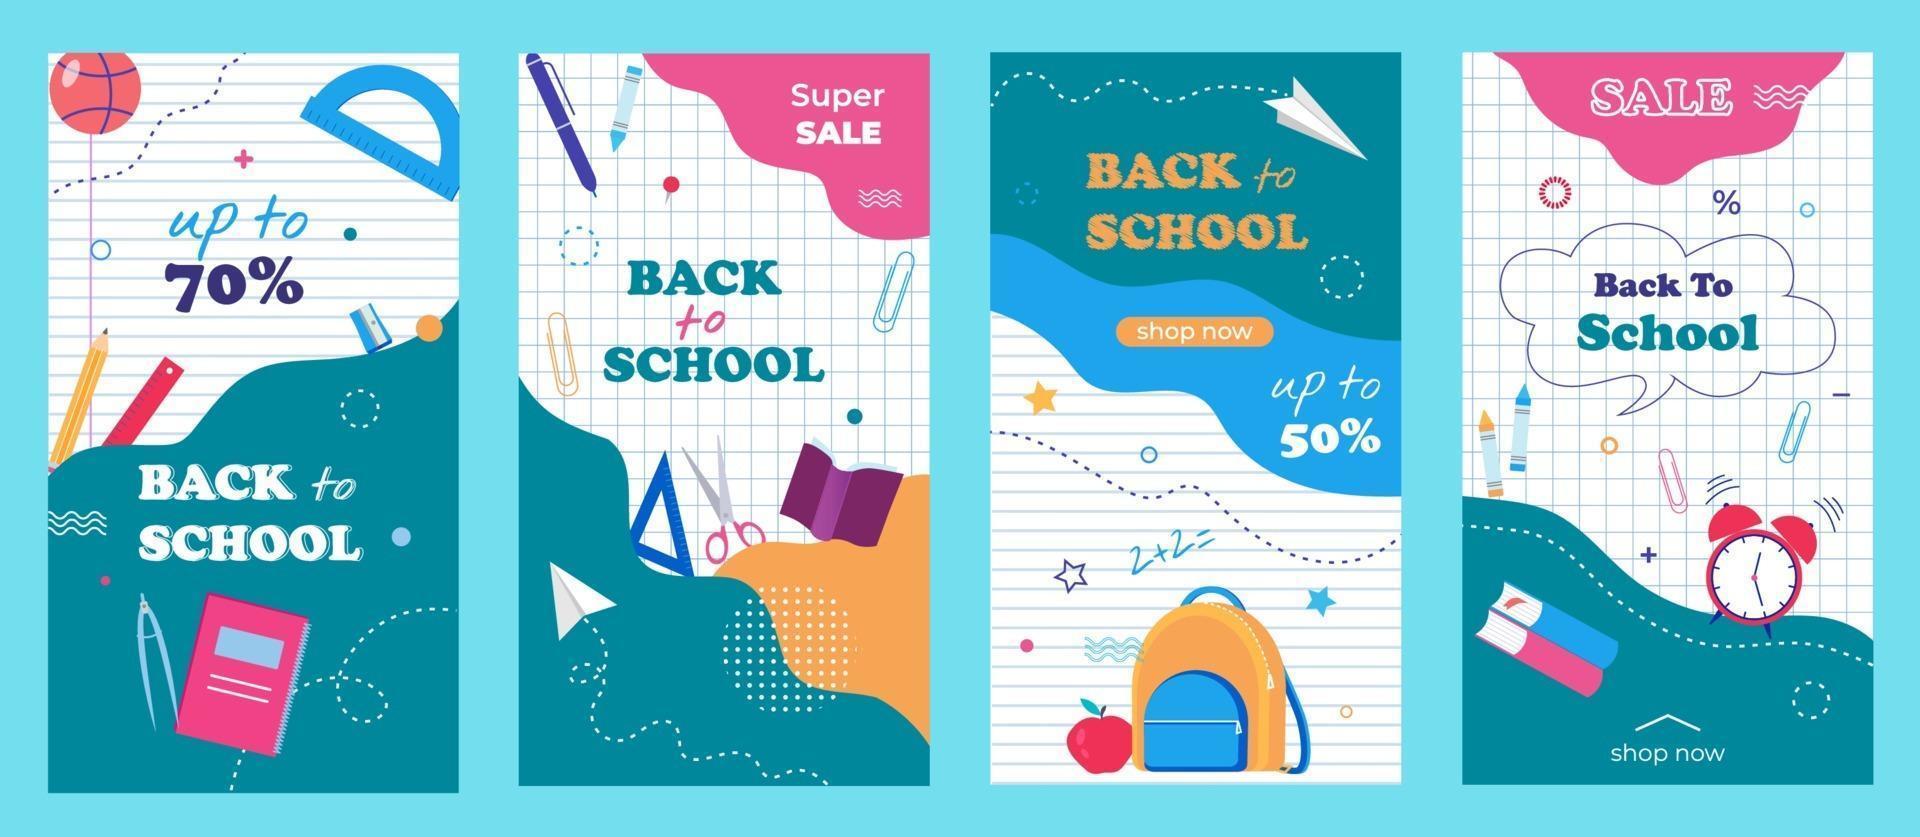 Back to school Stories template for social media, apps, print. Sale flyers set with a modern abstract, notebook paper background and school items. vector